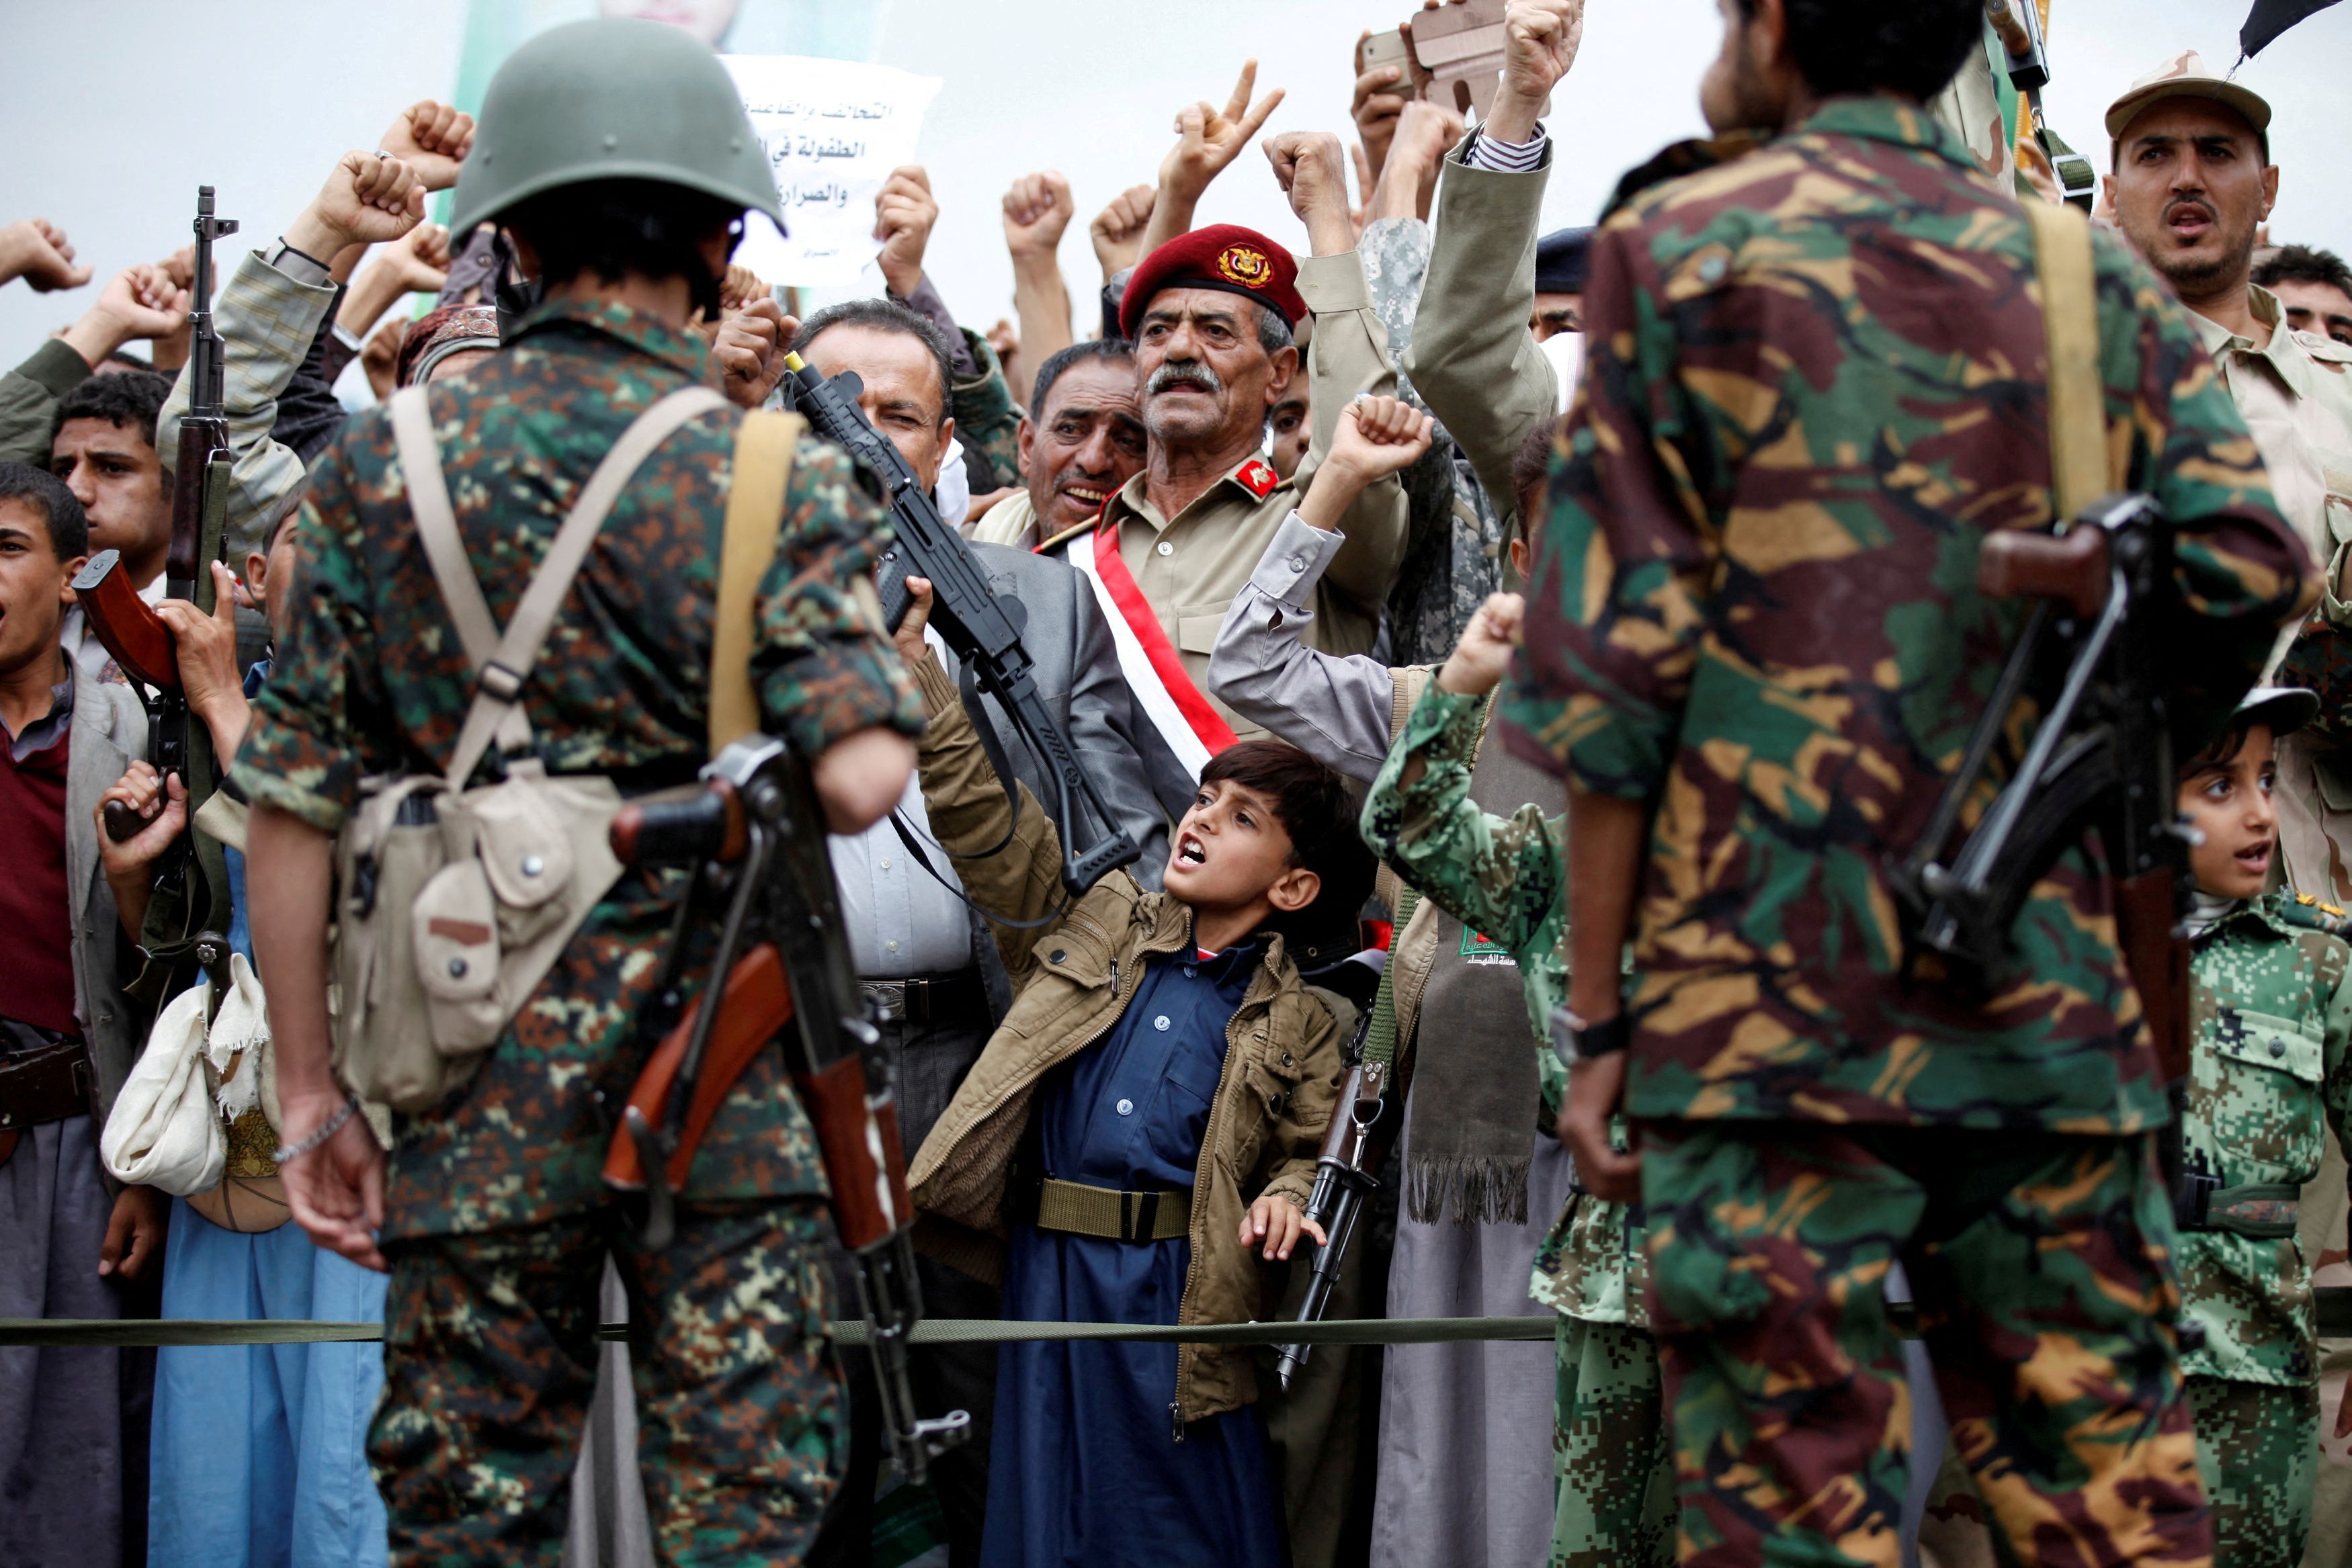 Supporters of the Houthi movement take part in a demonstration, in Sanaa